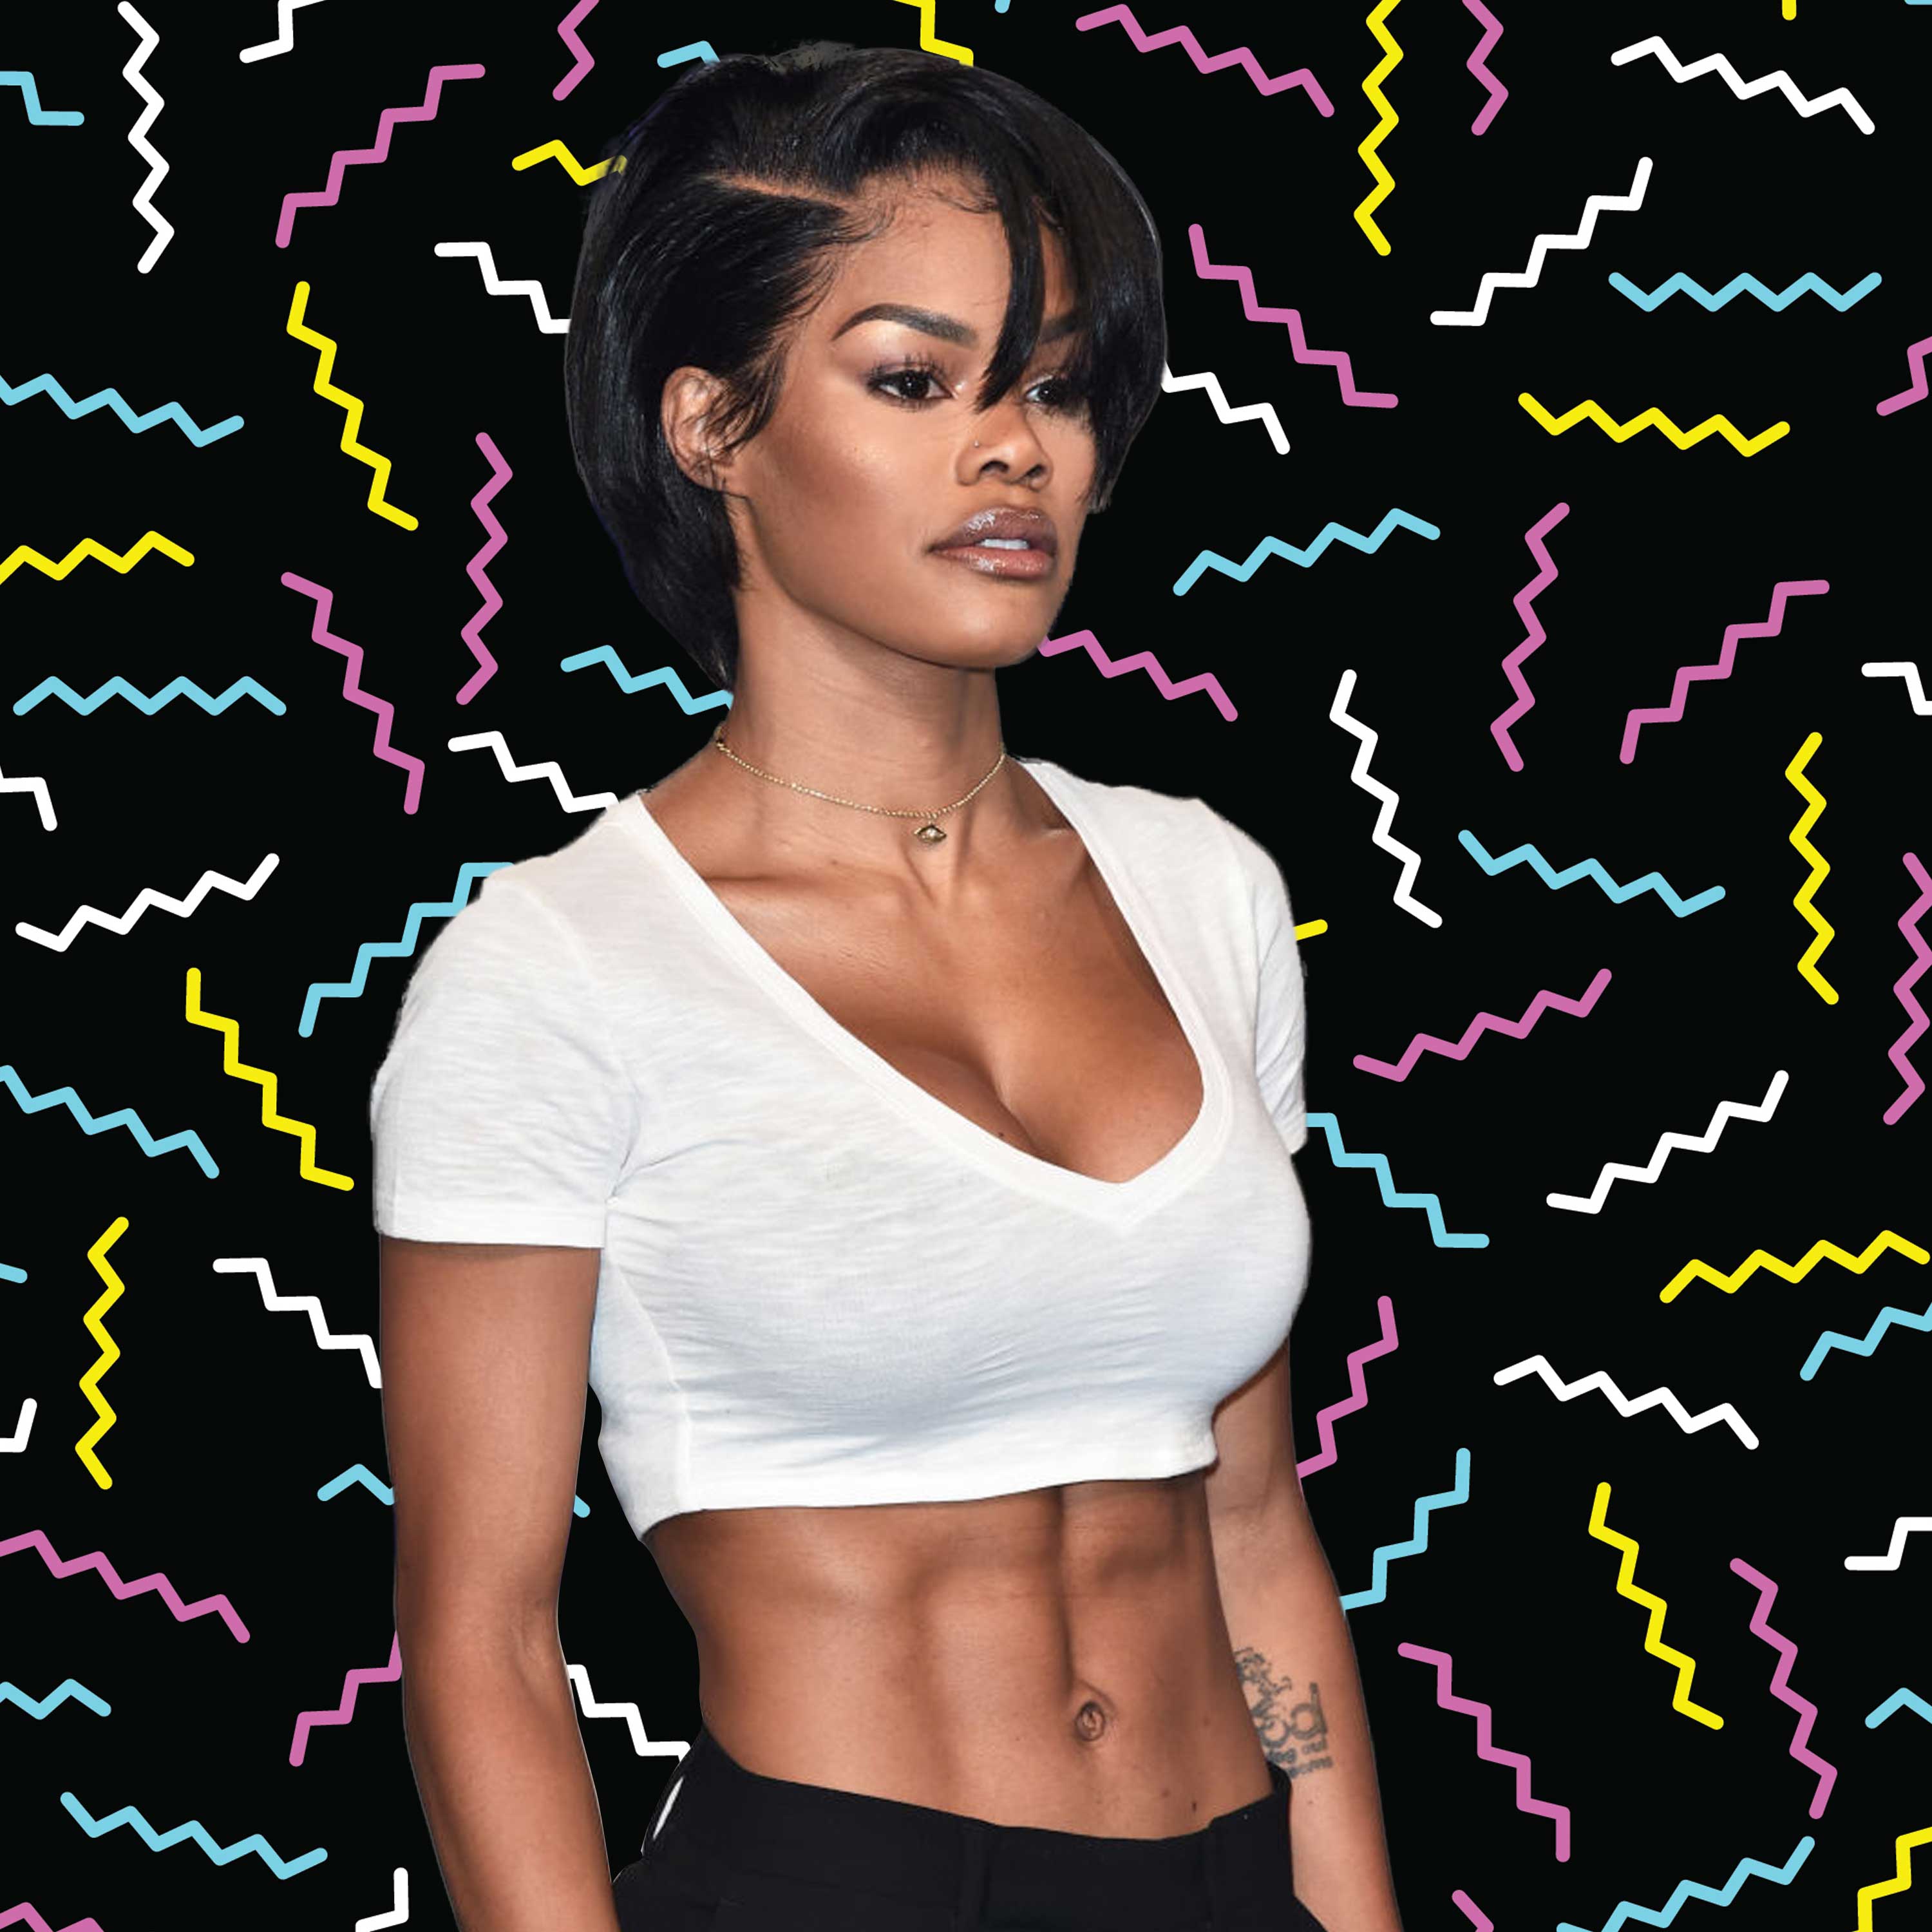 Teyana Taylor Pays Homage To Janet Jackson While Slaying Her MTV VMAs Look
